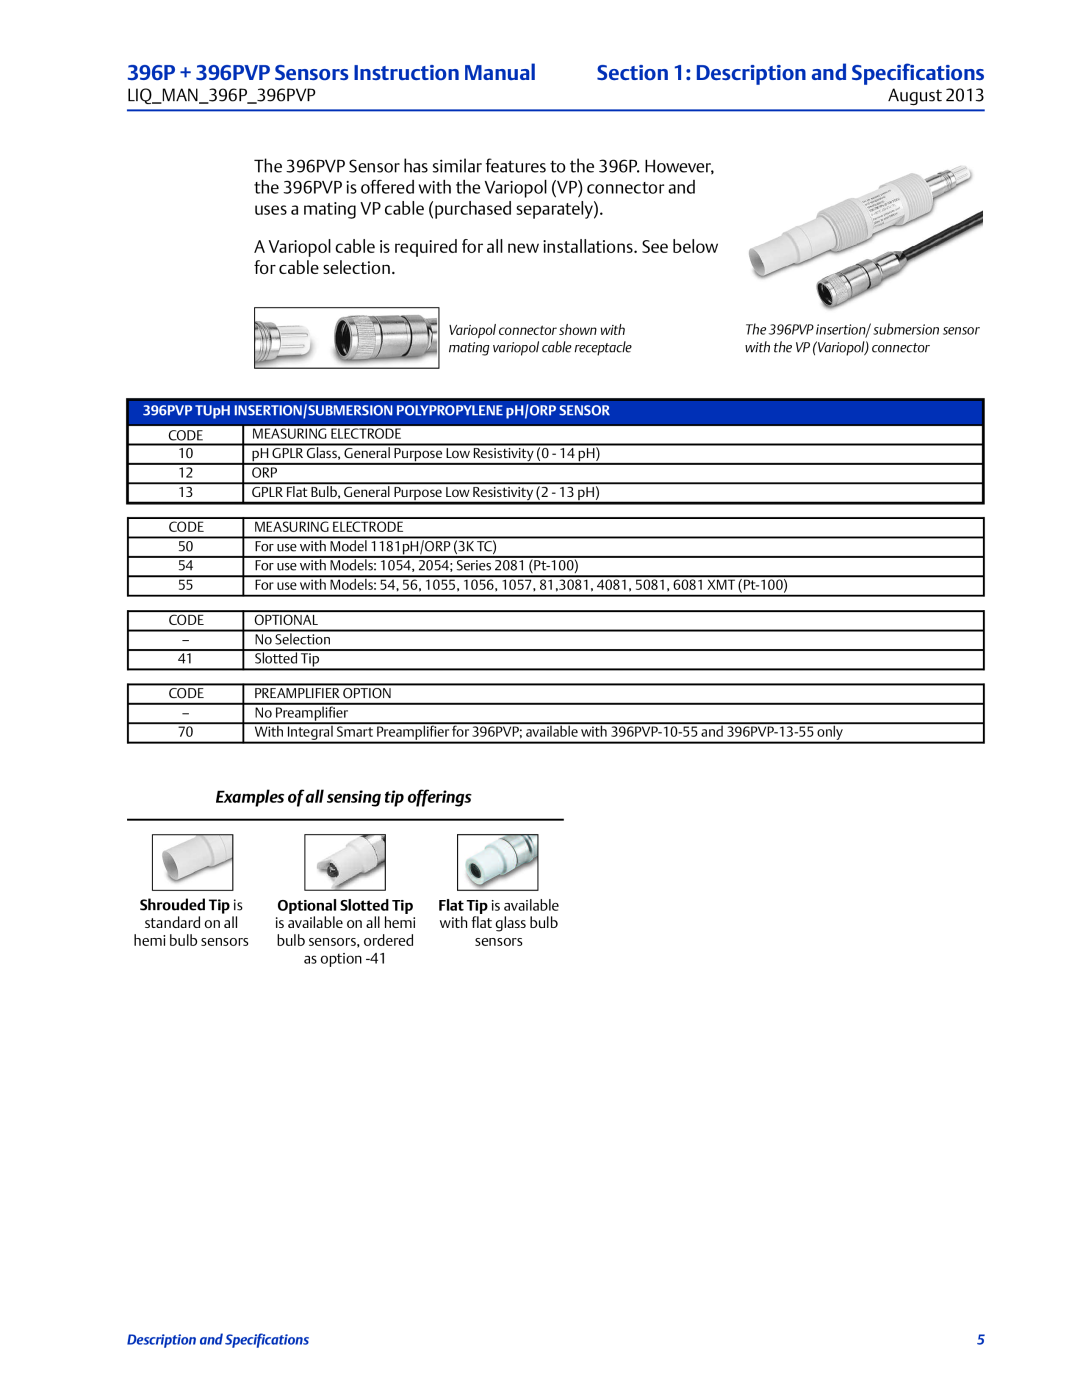 Emerson 396P + 396PVP Sensors Instruction Manual, Description and Specifications, Examples of all sensing tip offerings 